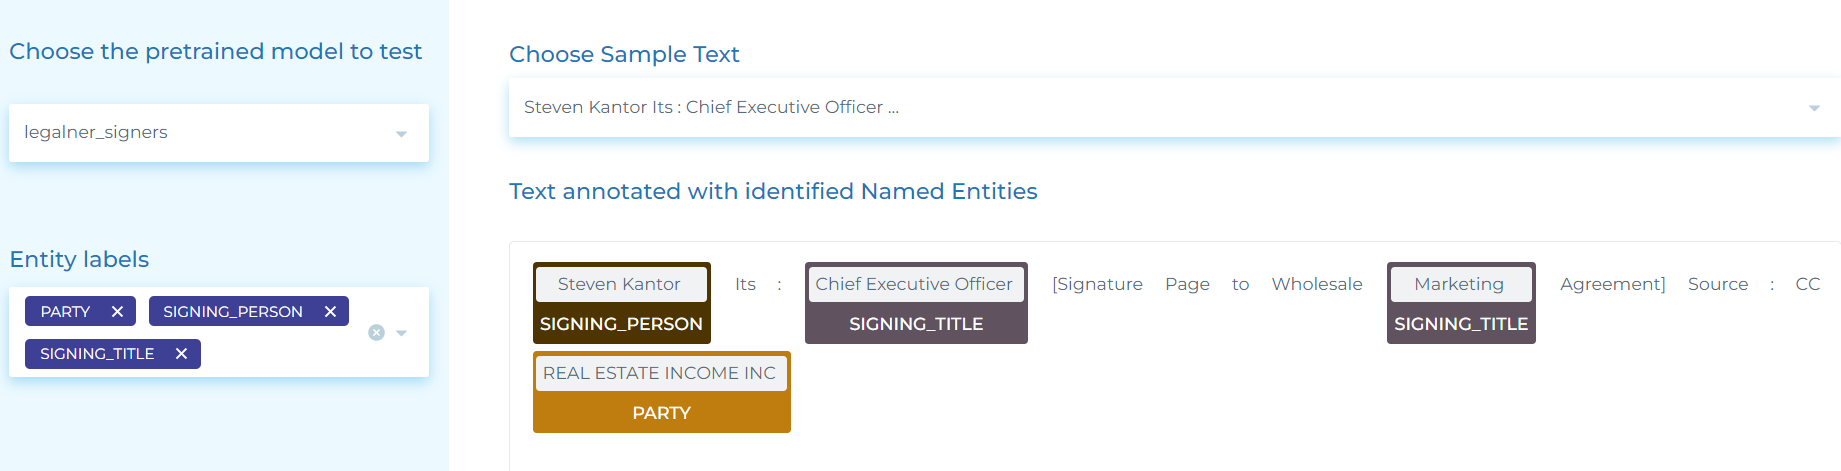 Extracting SIGNING_PERSON, SIGNING_TITLE and PARTY